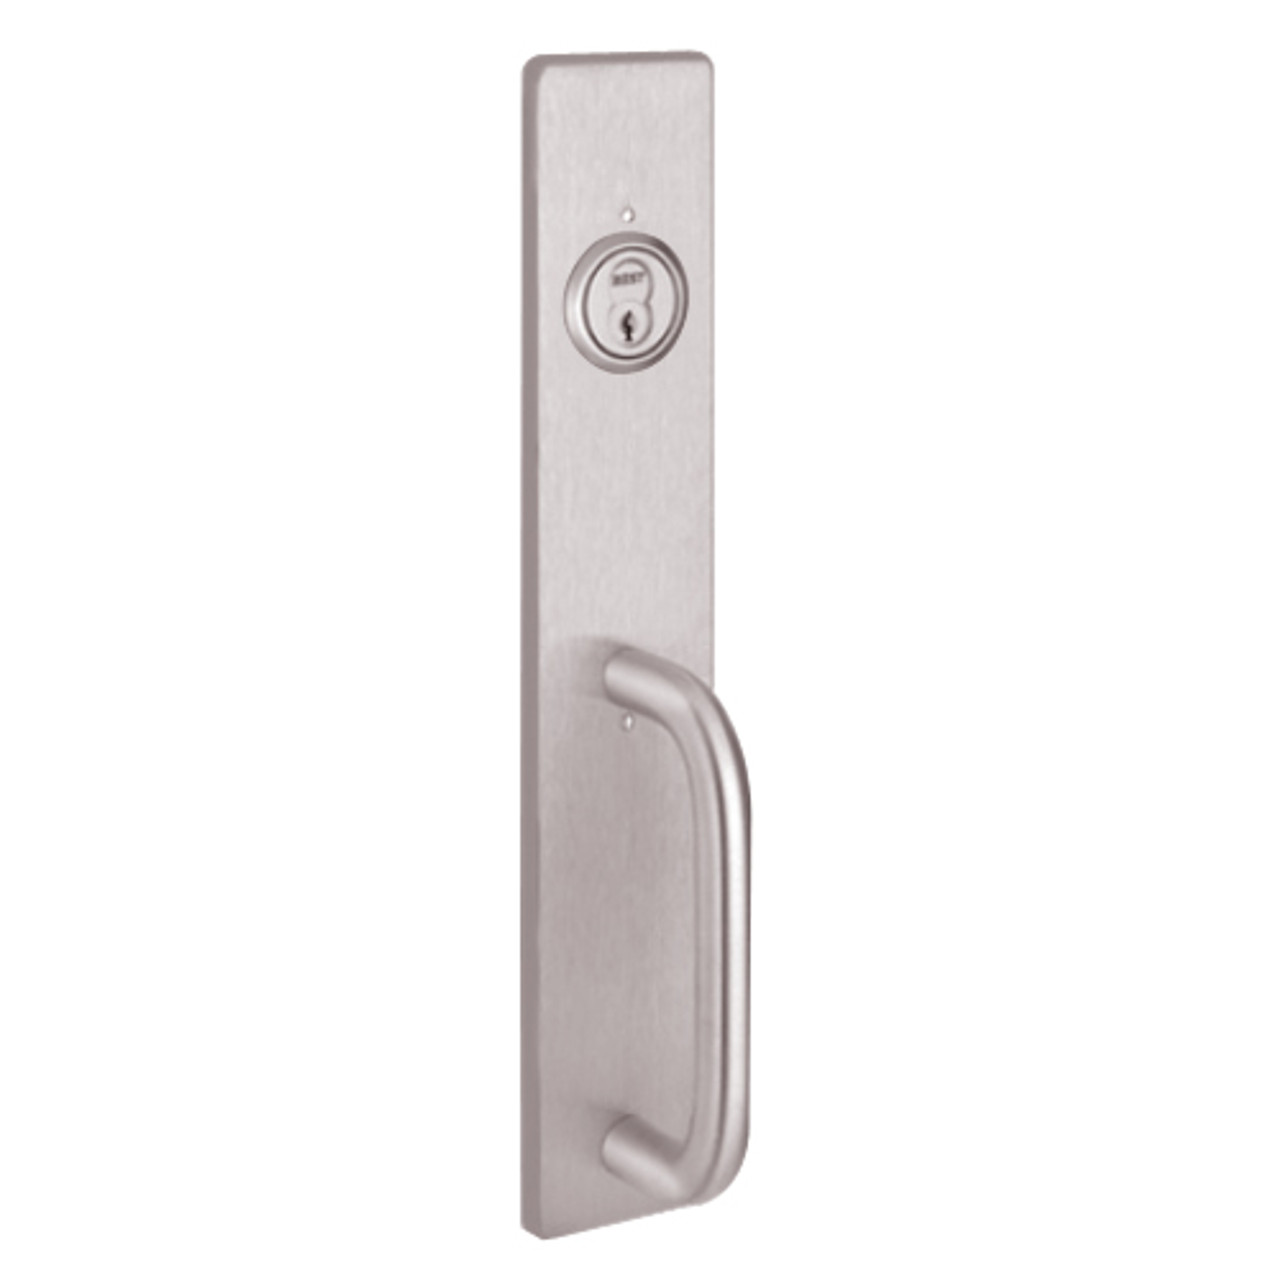 R1703C-630 PHI Key Retracts Latchbolt Retrofit Trim with C Design Pull for Apex and Olympian Series Exit Device in Satin Stainless Steel Finish